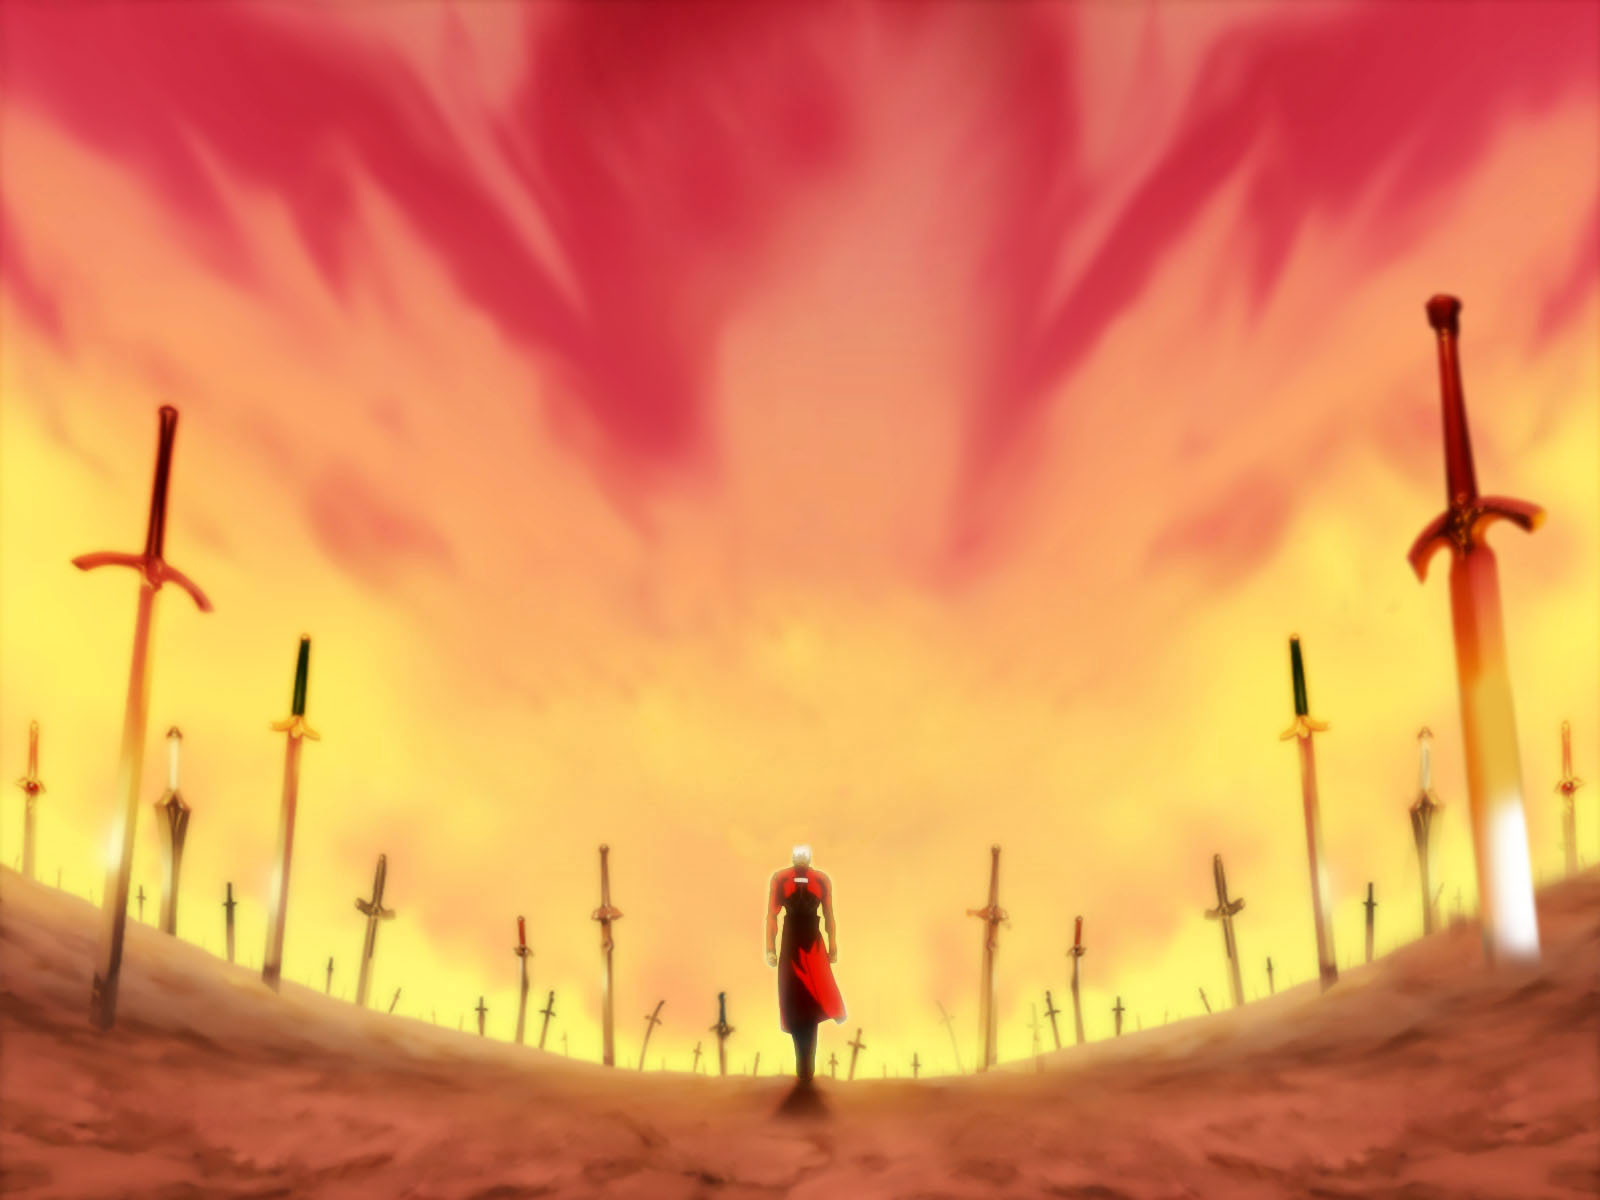 Fate/Stay Night: Unlimited Blade Works Wallpaper and Background Image